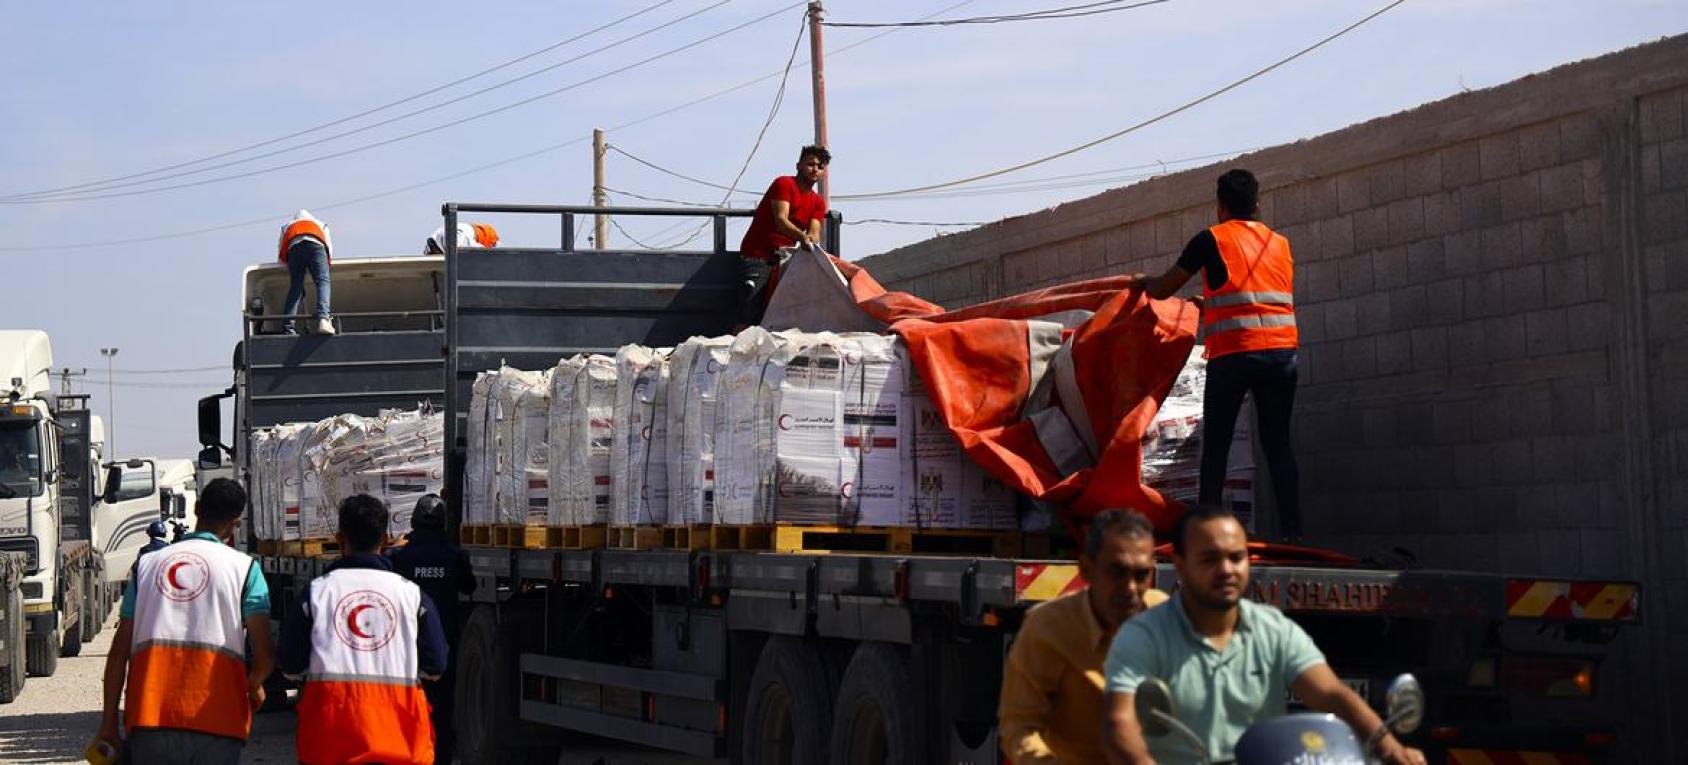 A giant truck carrying aid materials gets unloaded by workers